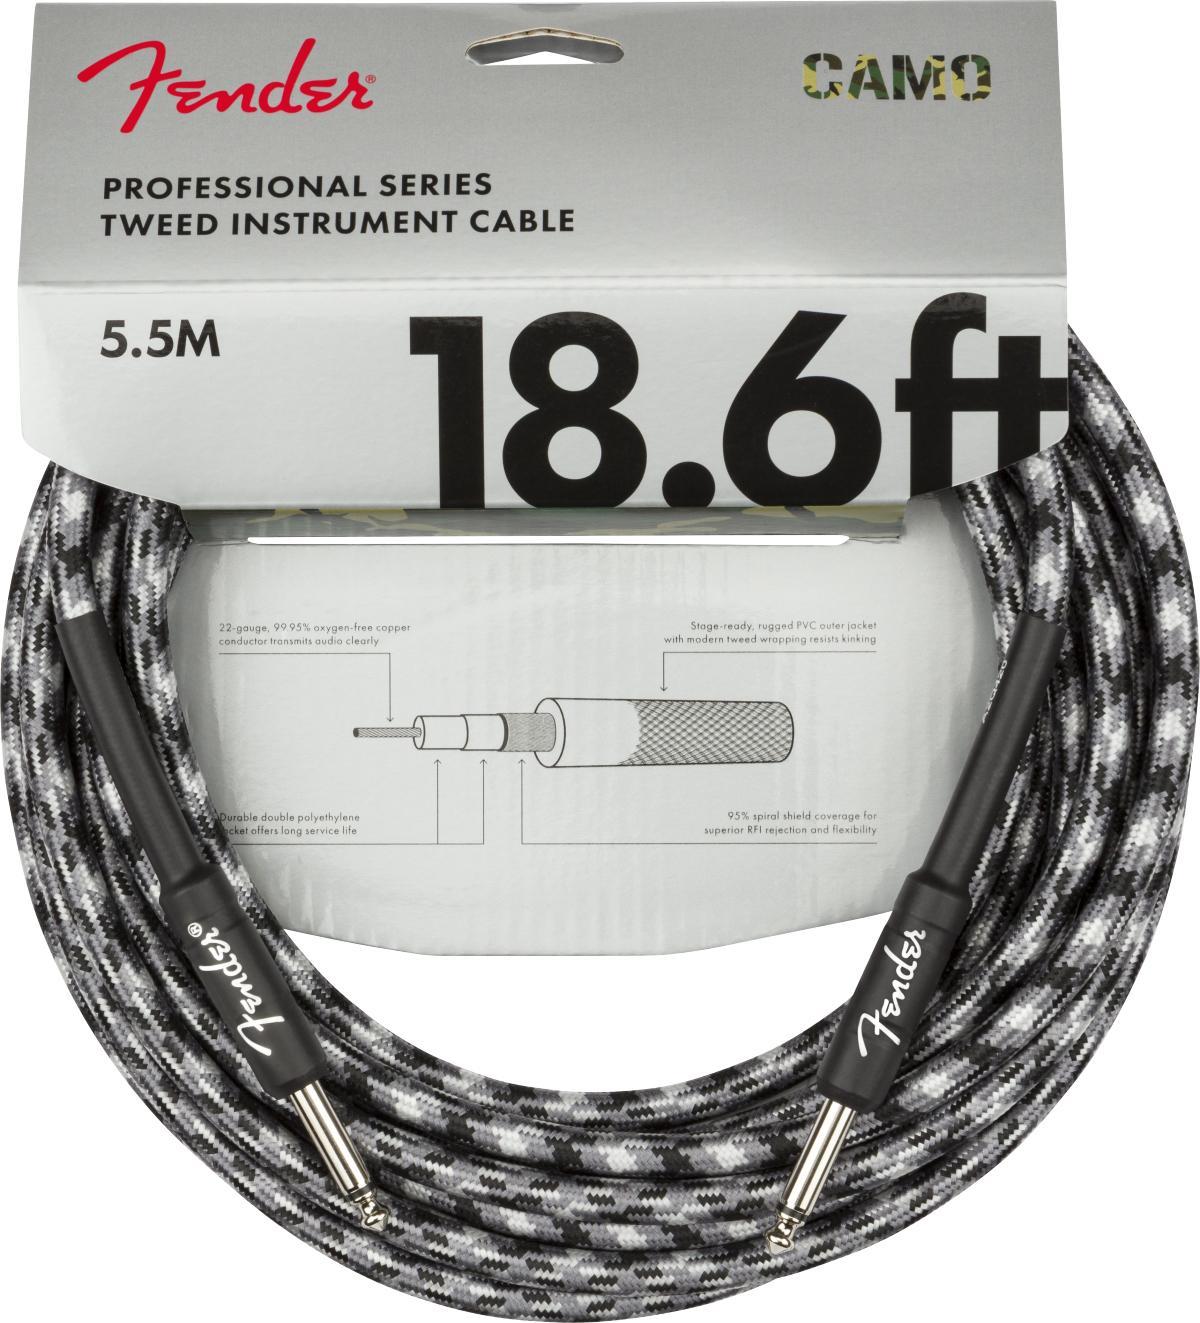 Cable Fender Professional Series Instrument Cable, Straight/Straight, 18.6ft - Winter Camo